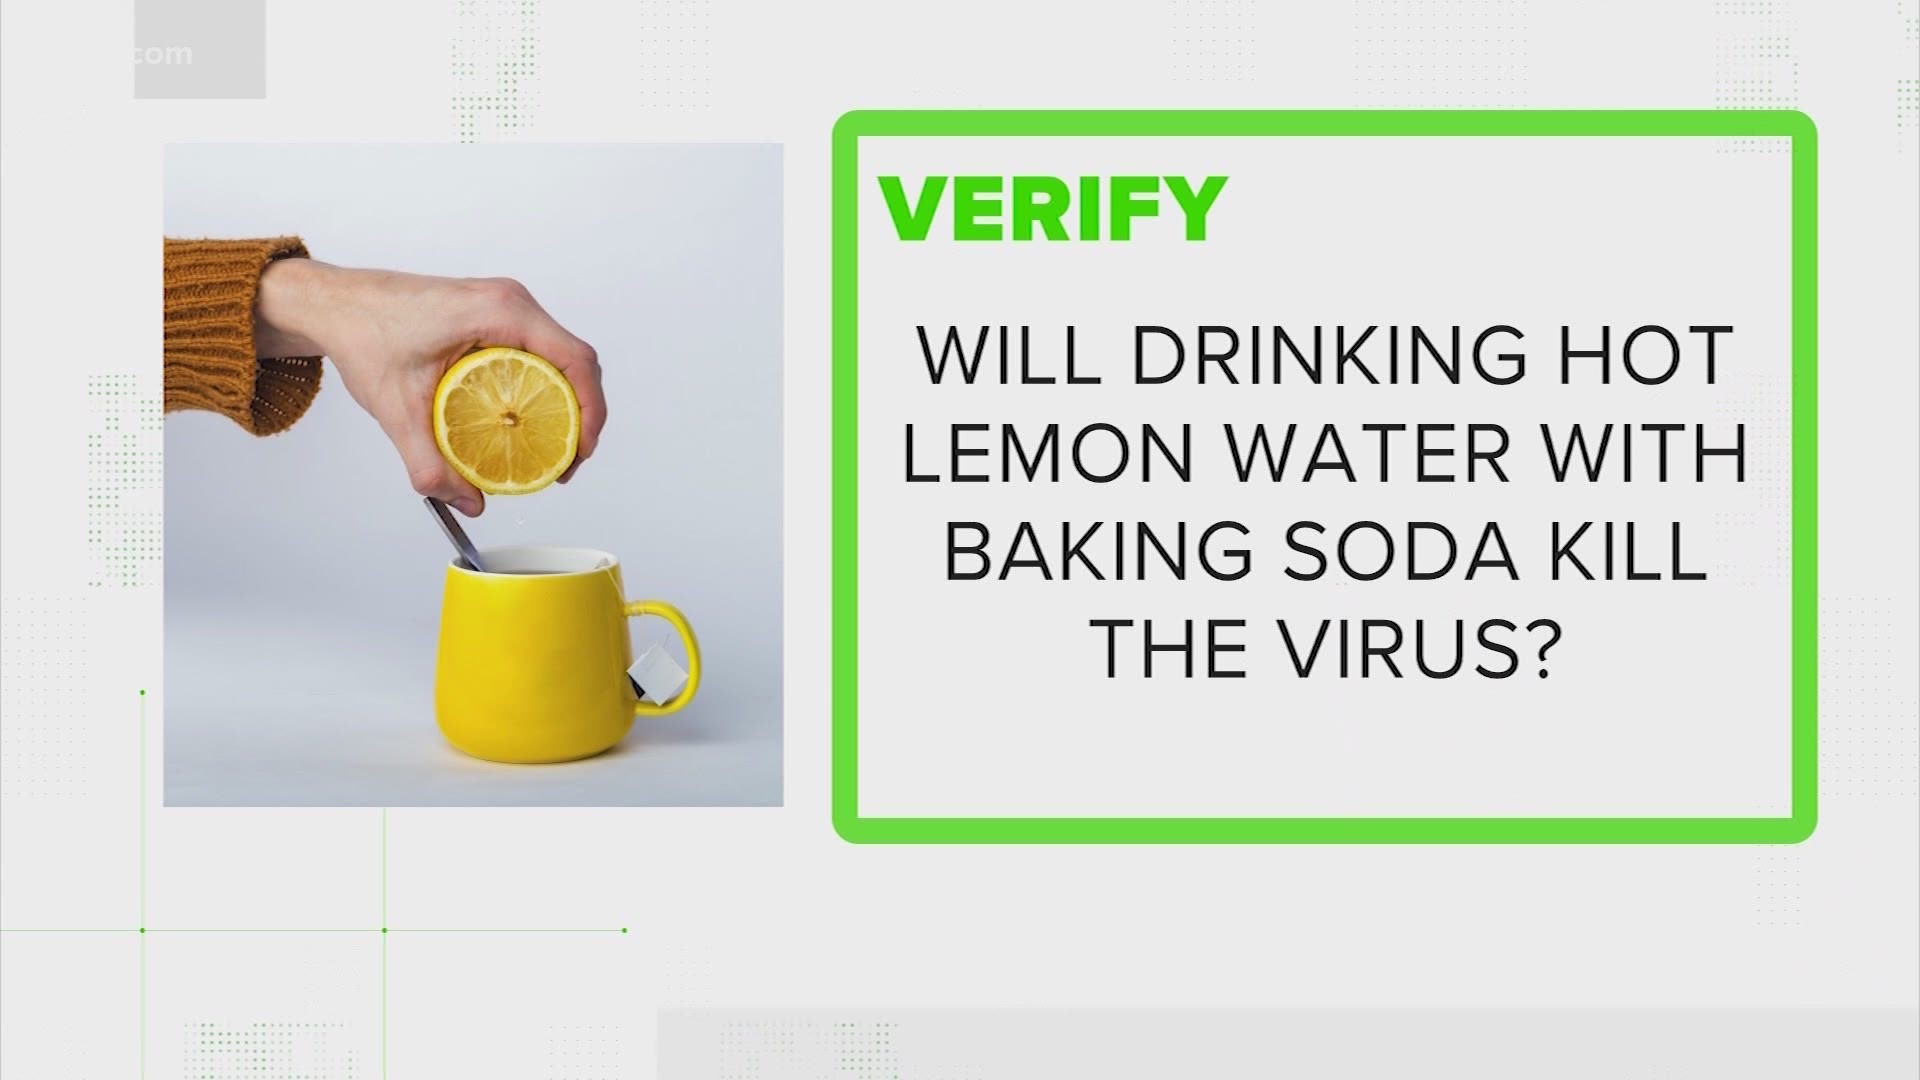 Can you treat coronavirus symptoms with household remedies? Our VERIFY team breaks down what you need to know about the "rumored cures" spreading online.